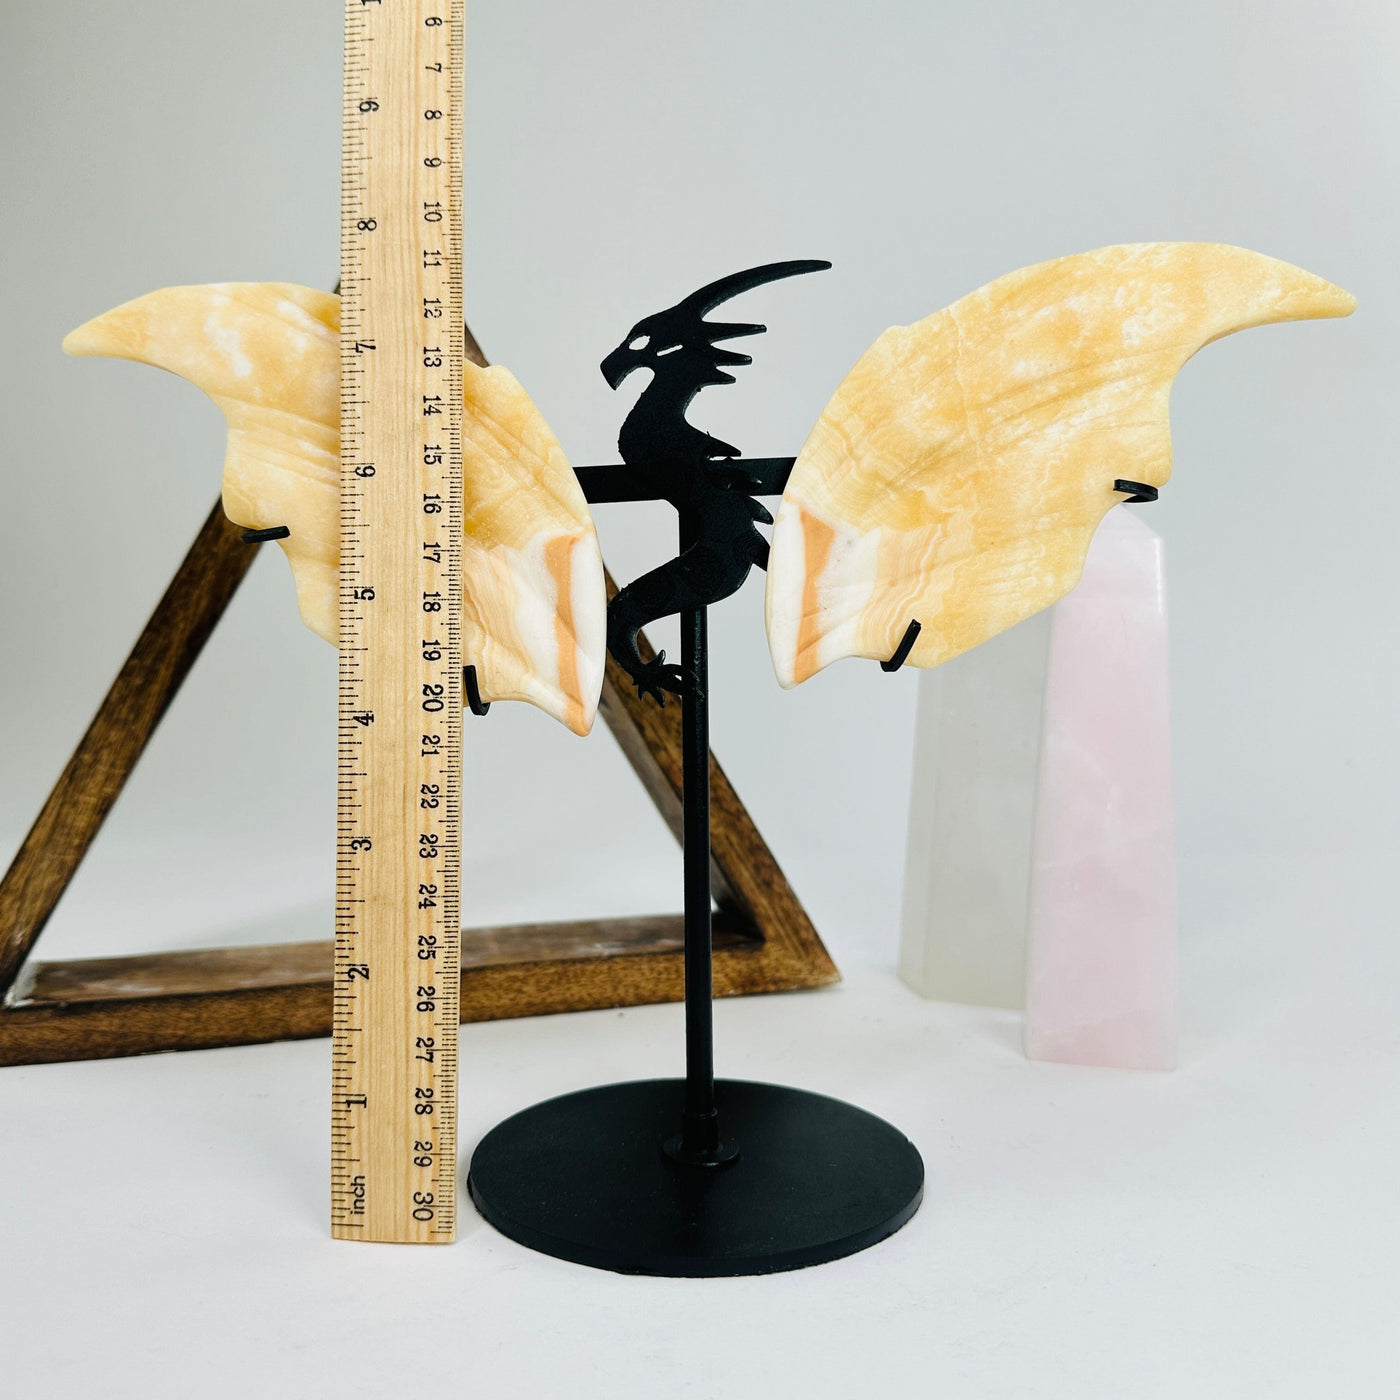 orange calcite dragon on metal stand next to a ruler for size reference